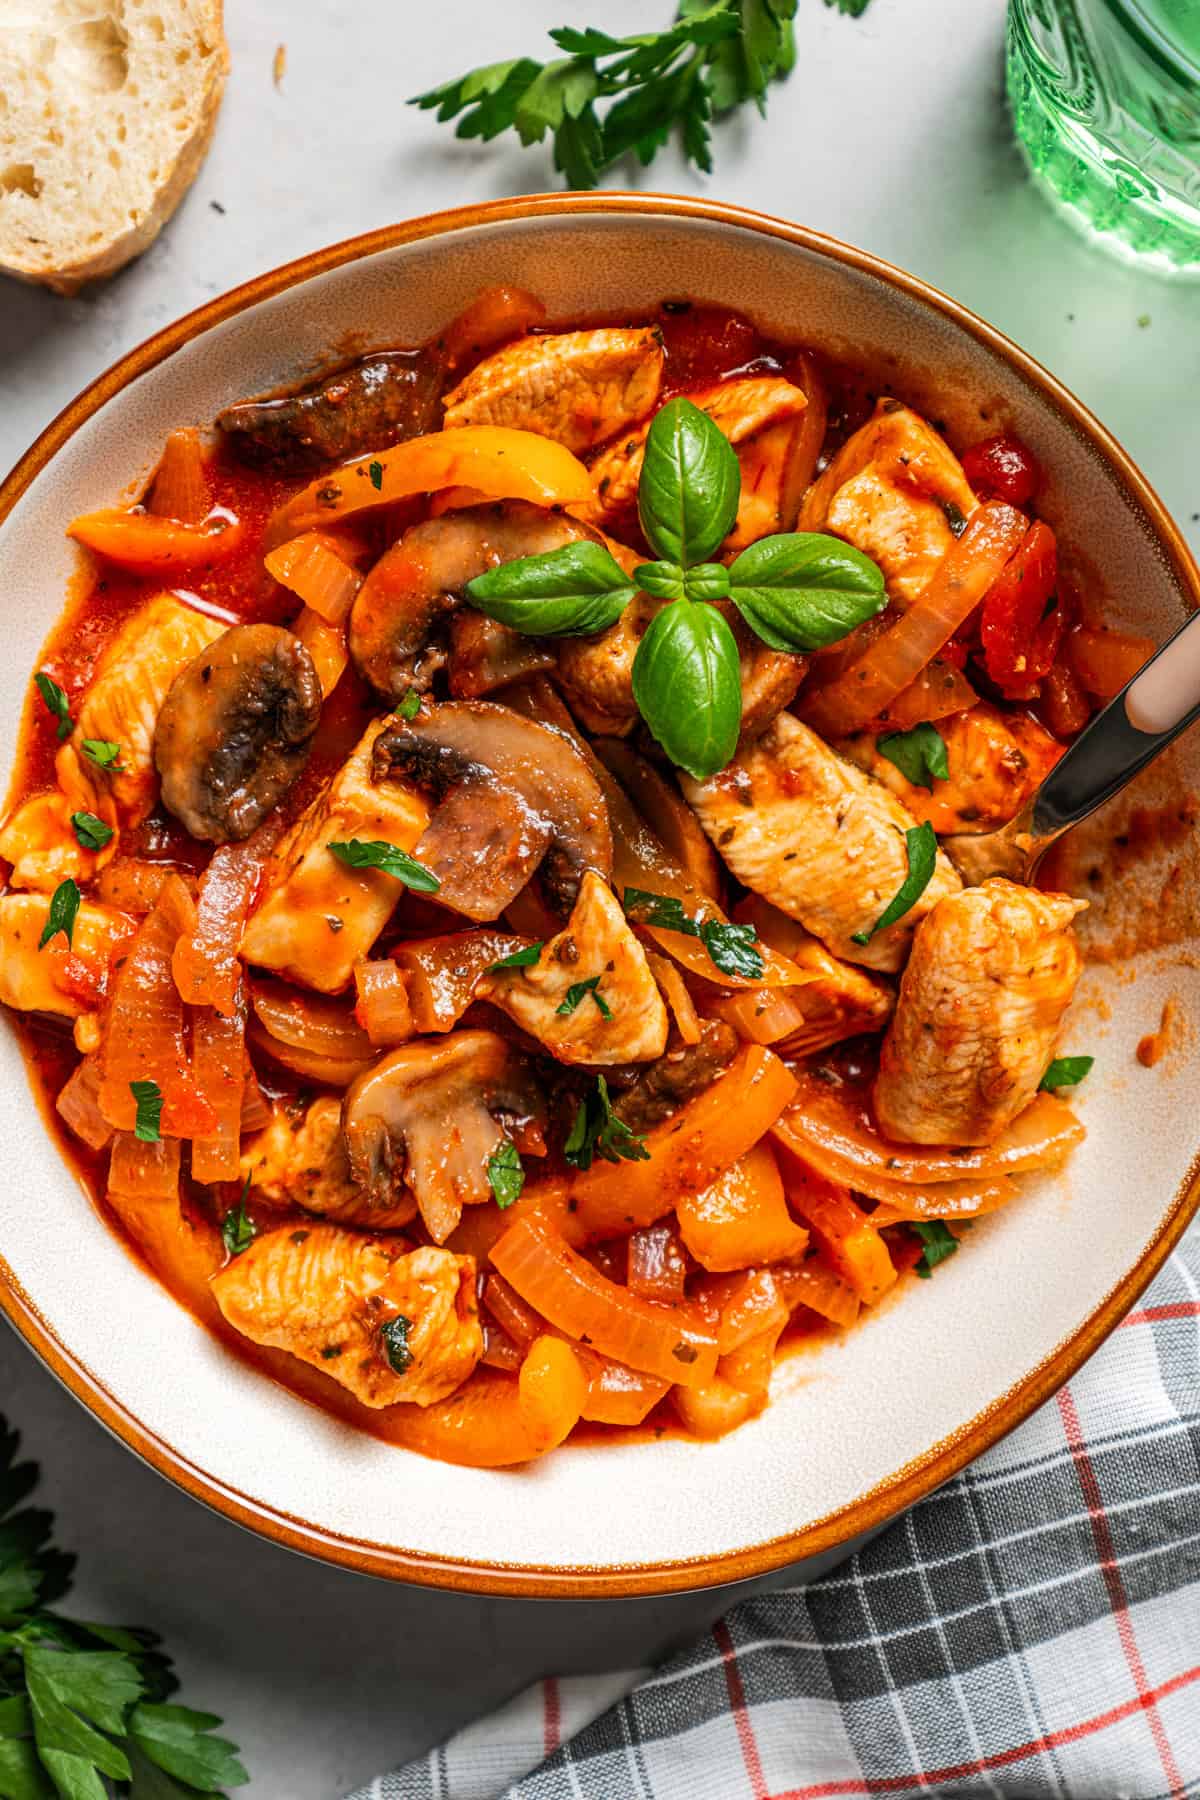 Overhead image of a bowl with chicken, mushrooms, onions, and bell peppers in tomato sauce.